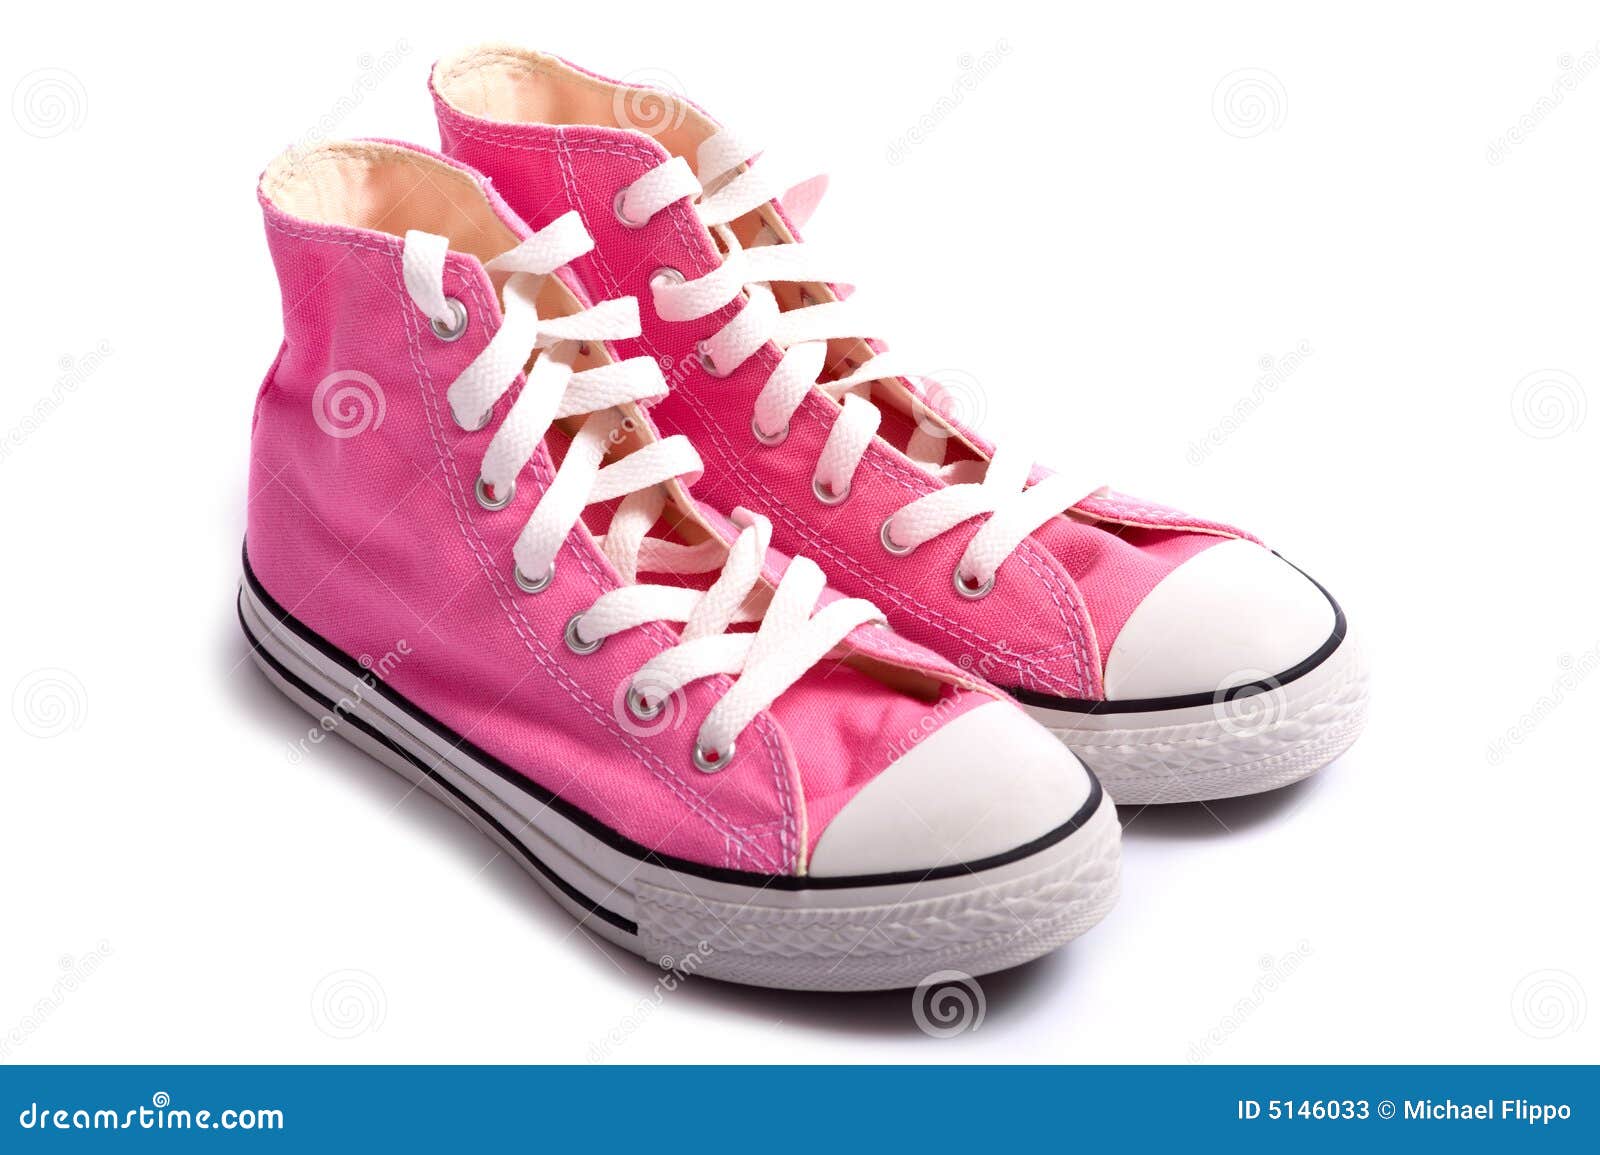 Pink Basketball Shoes stock image. Image of colorful, fabric - 5146033